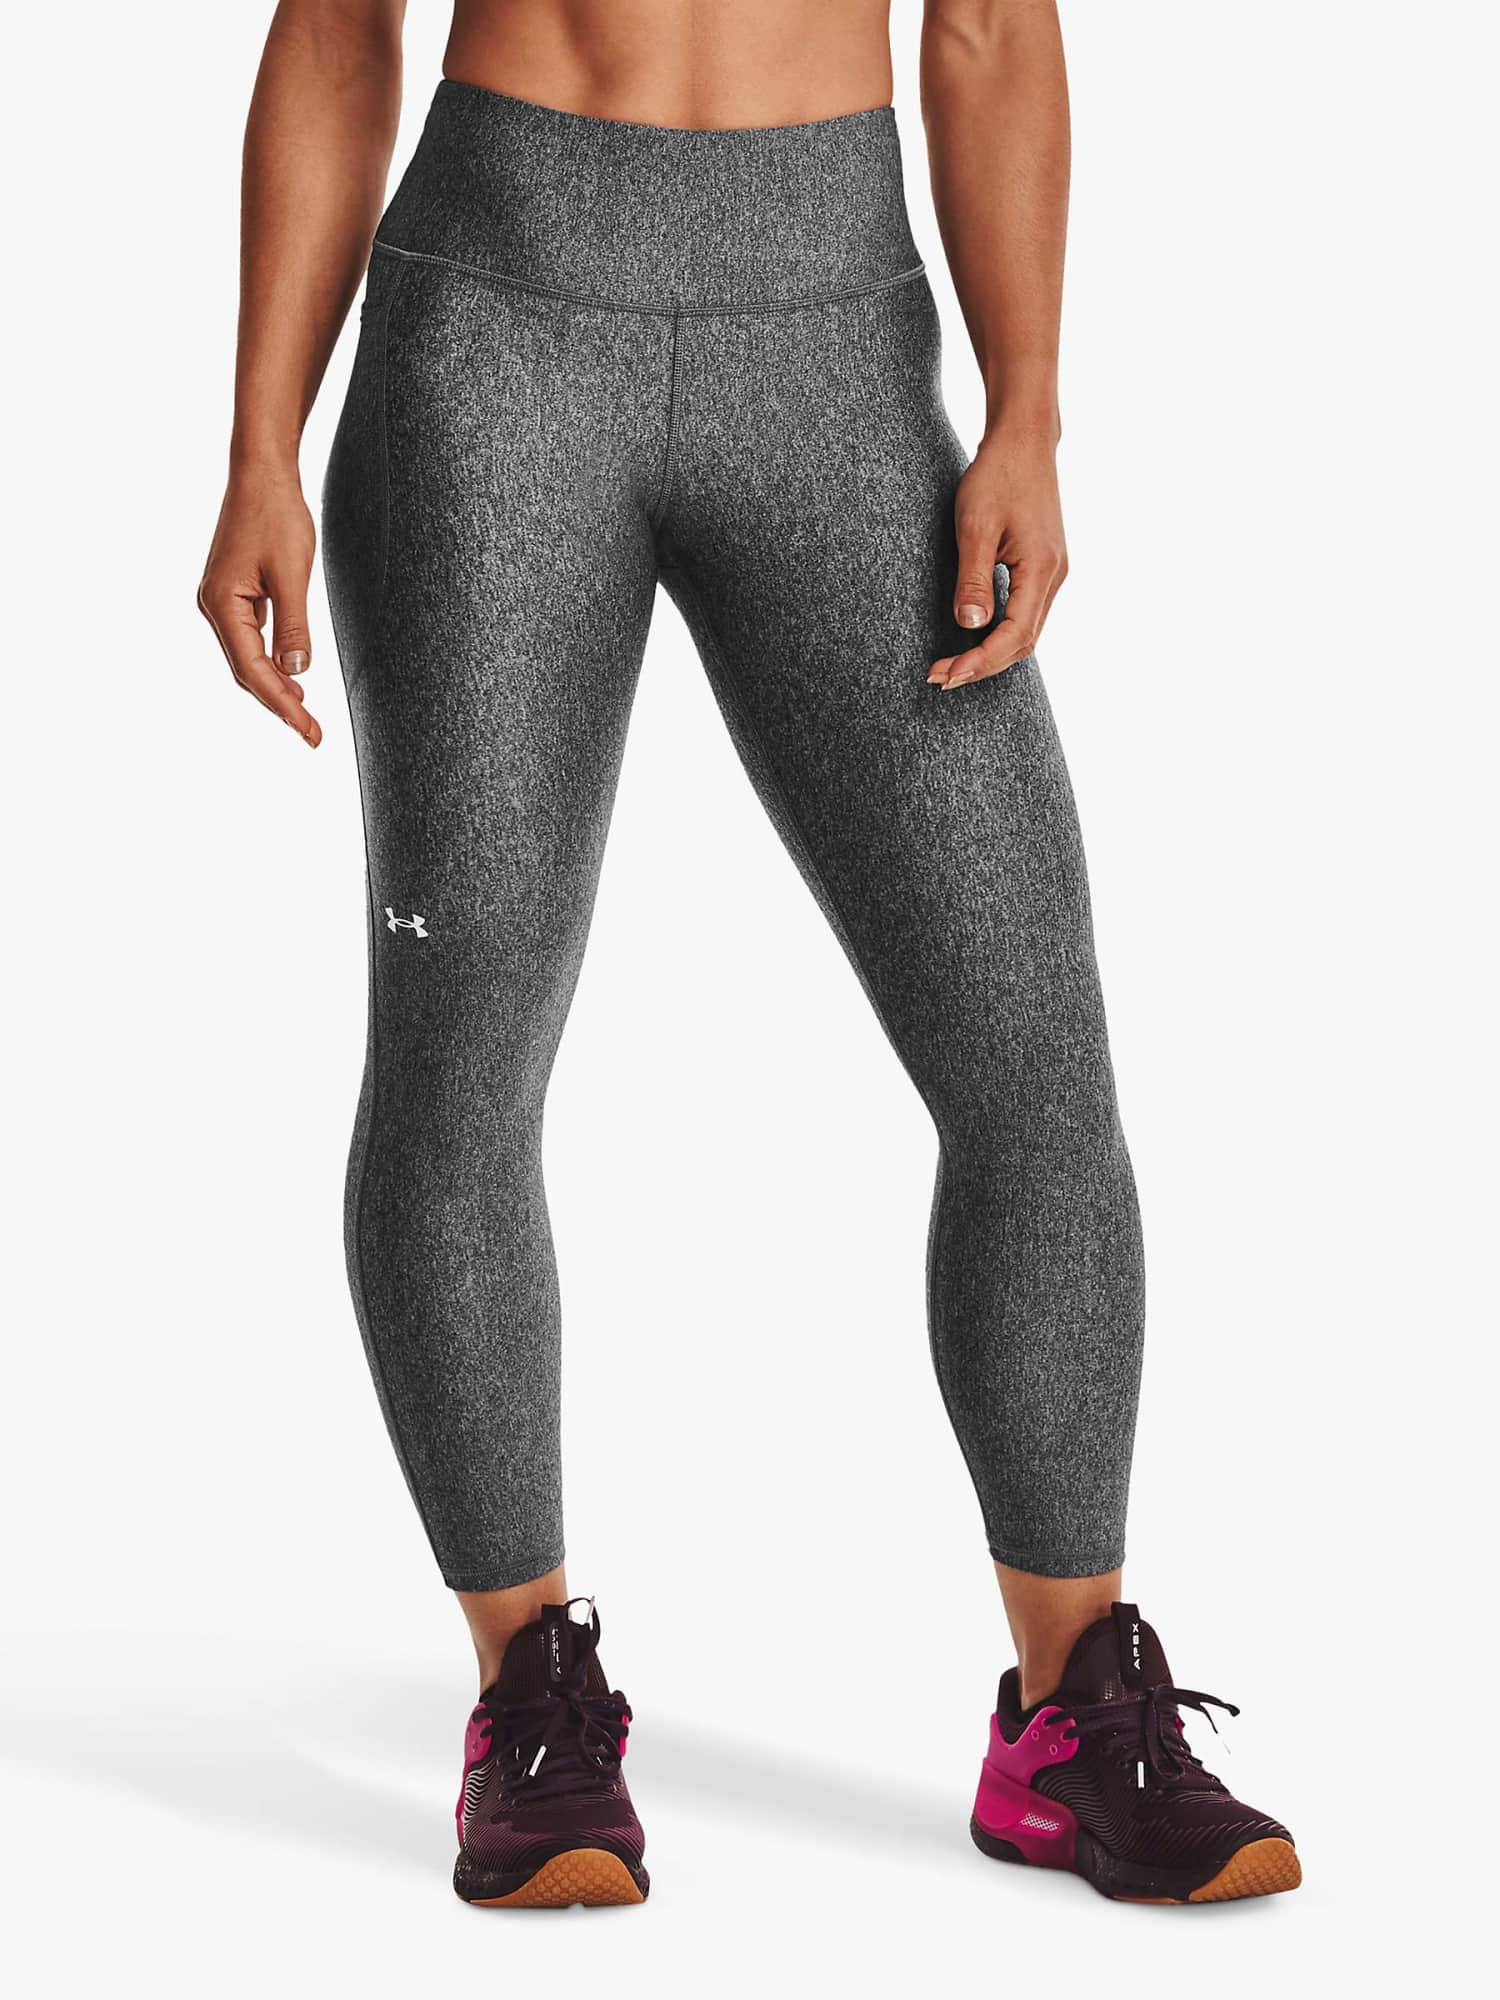 Lucas Hugh Limited Edition Axis Leggings, 11 High-Waisted Leggings to Add  to Your Workout Wardrobe